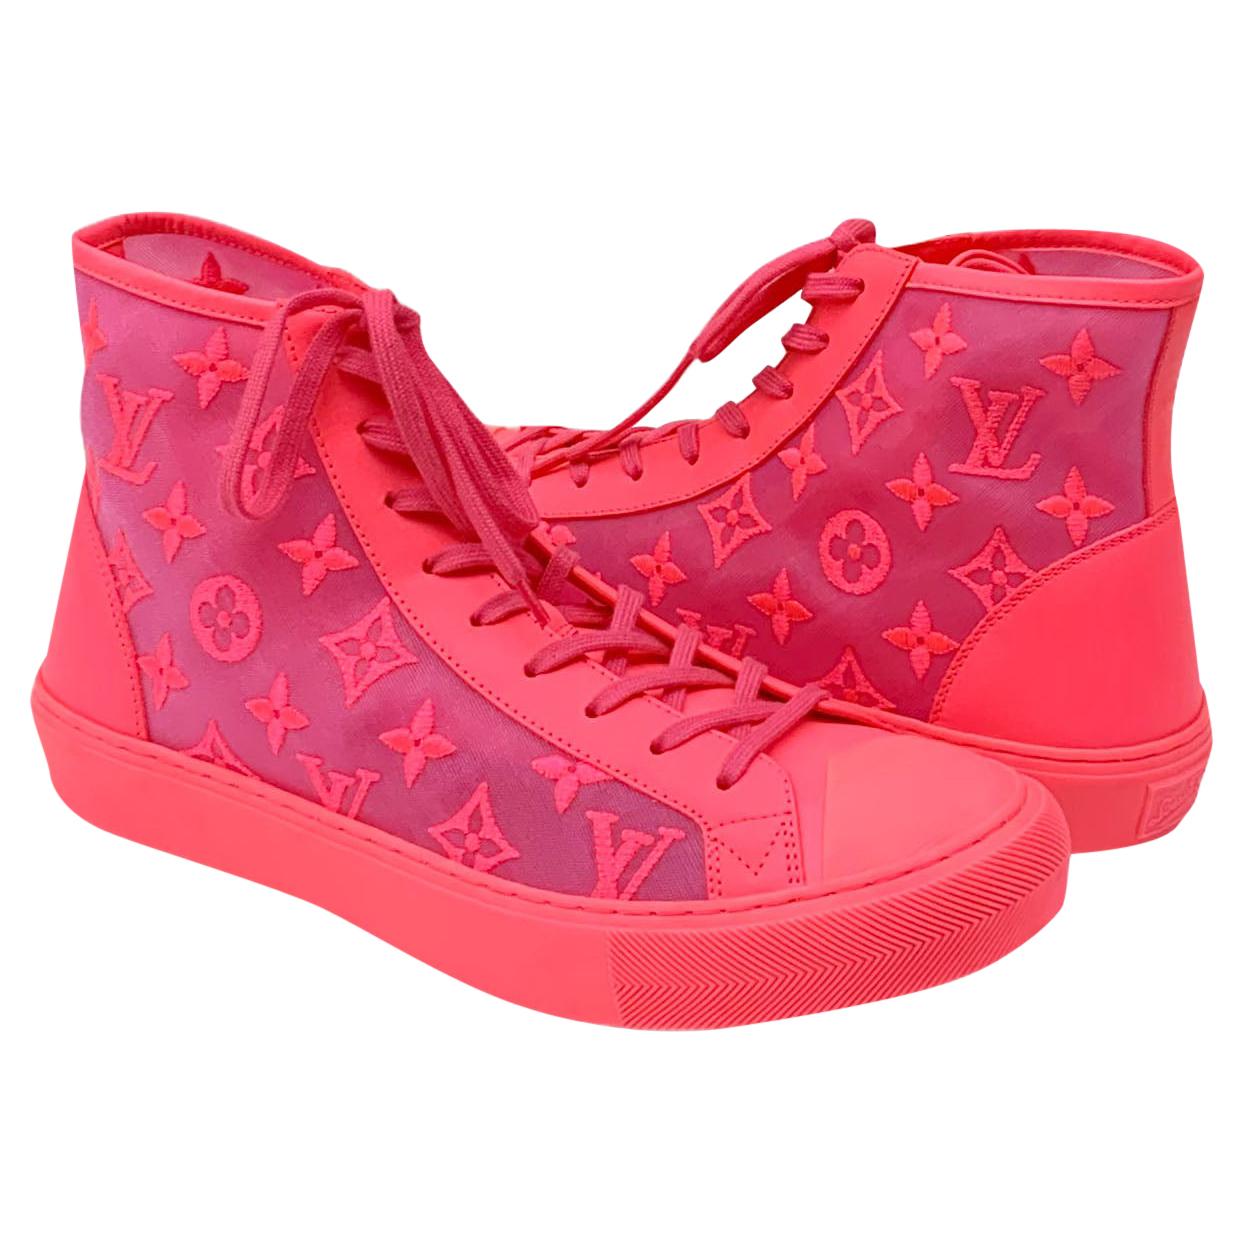 vuitton pink sneakers